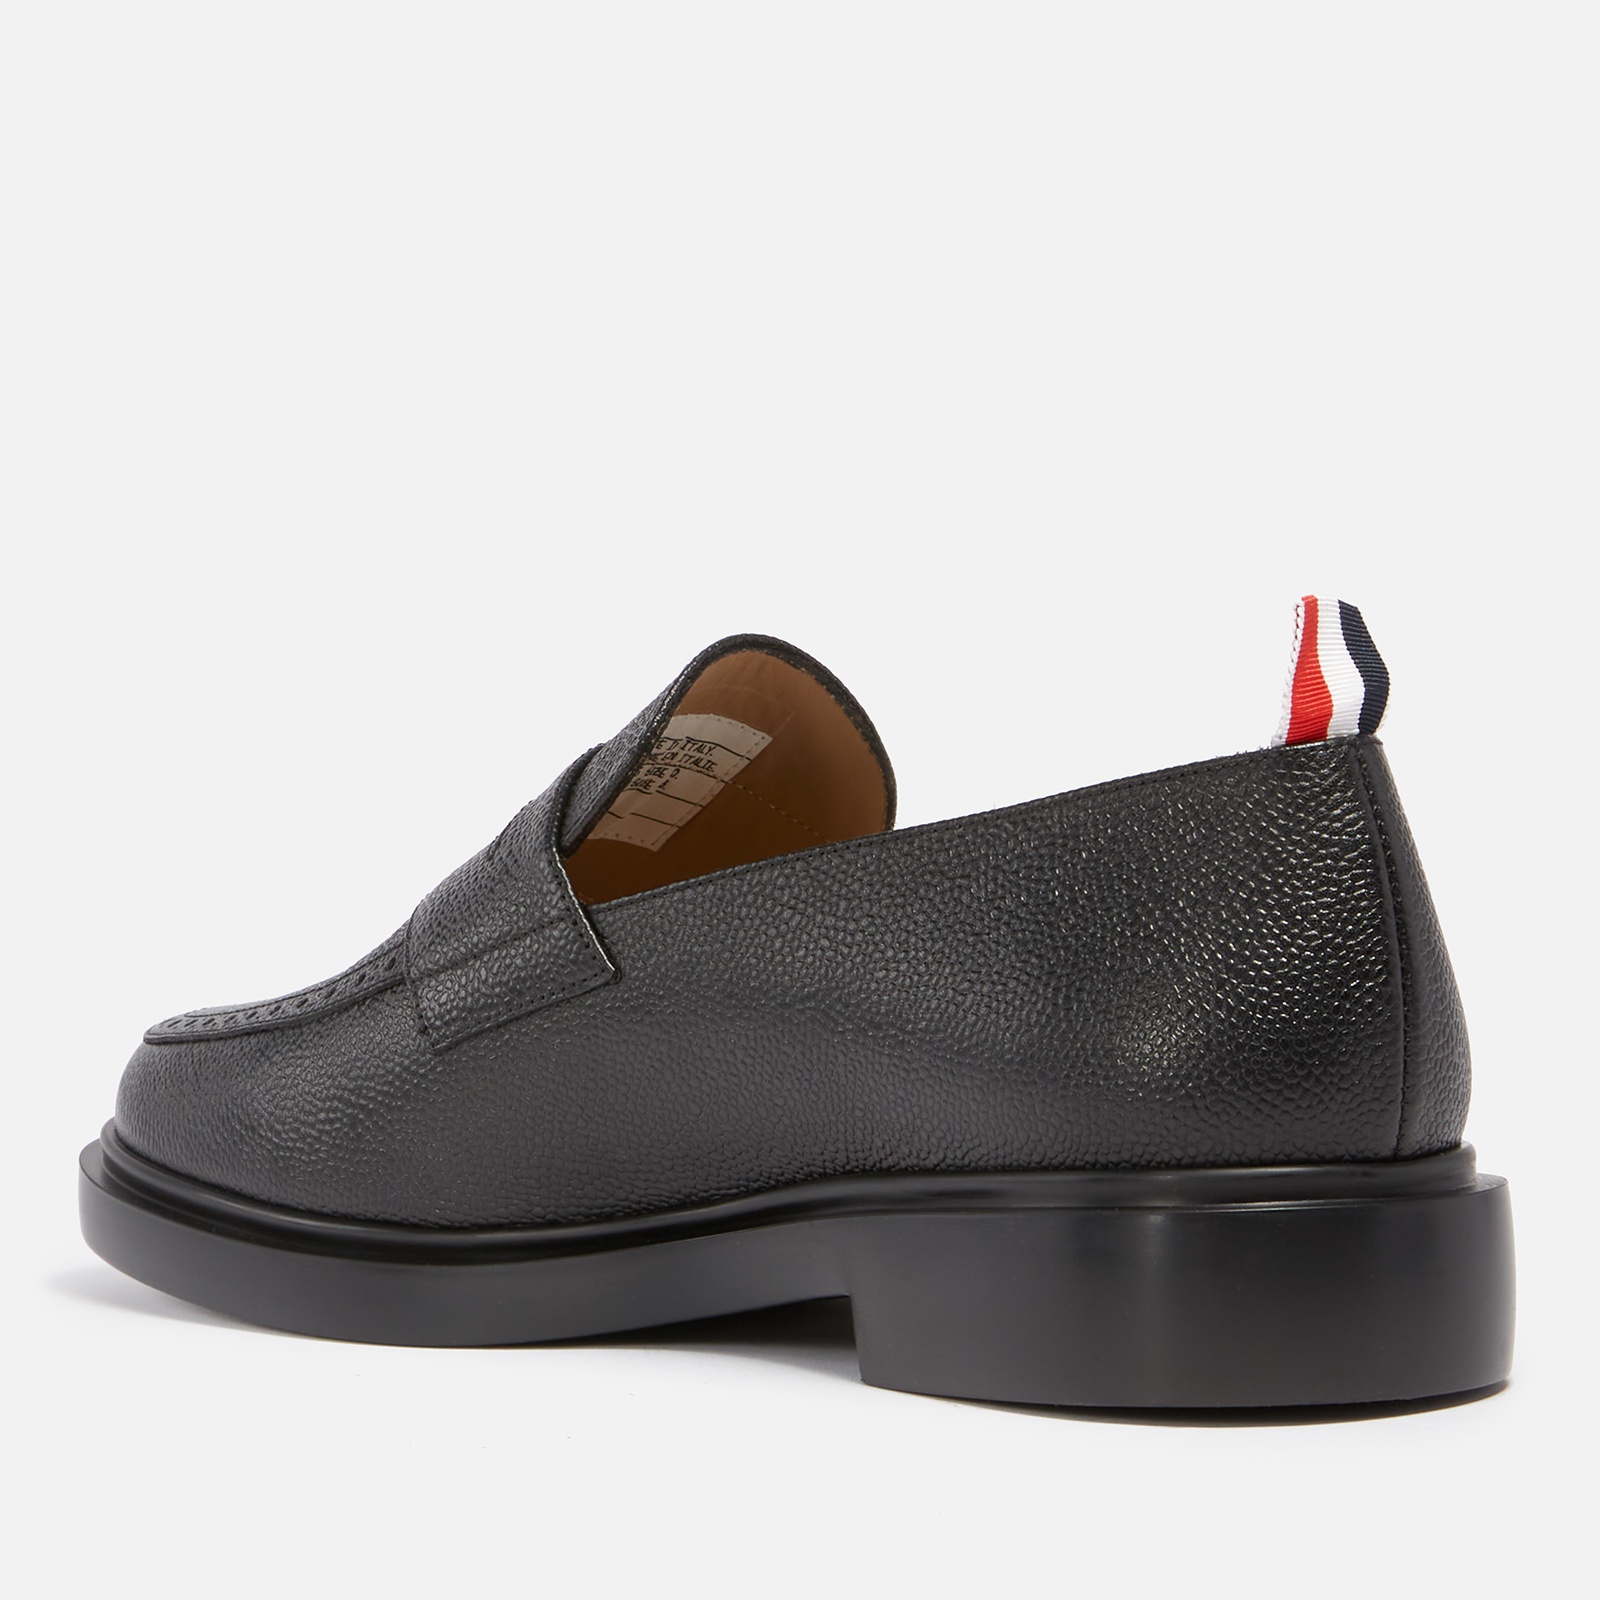 Thom Browne Men's Penny Loafers - Black - 2